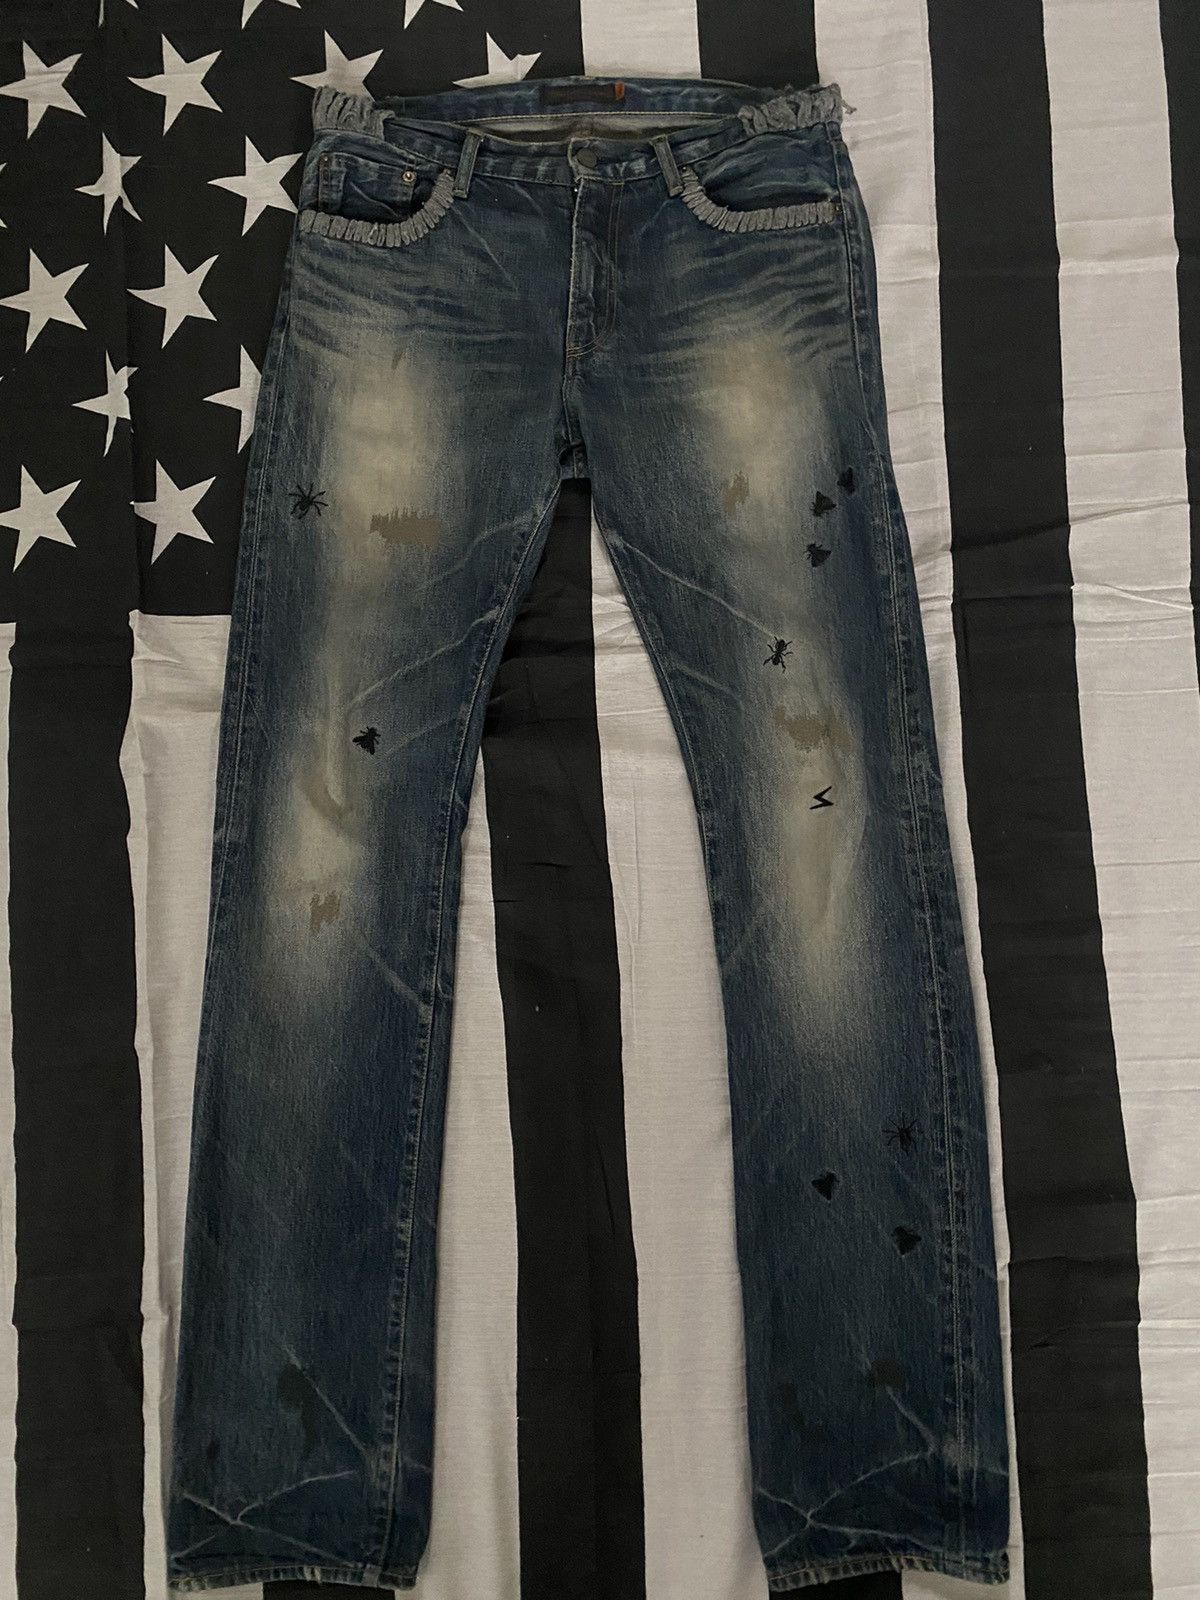 Undercover Undercover Crash Denim Witches Cell Division AW02 | Grailed